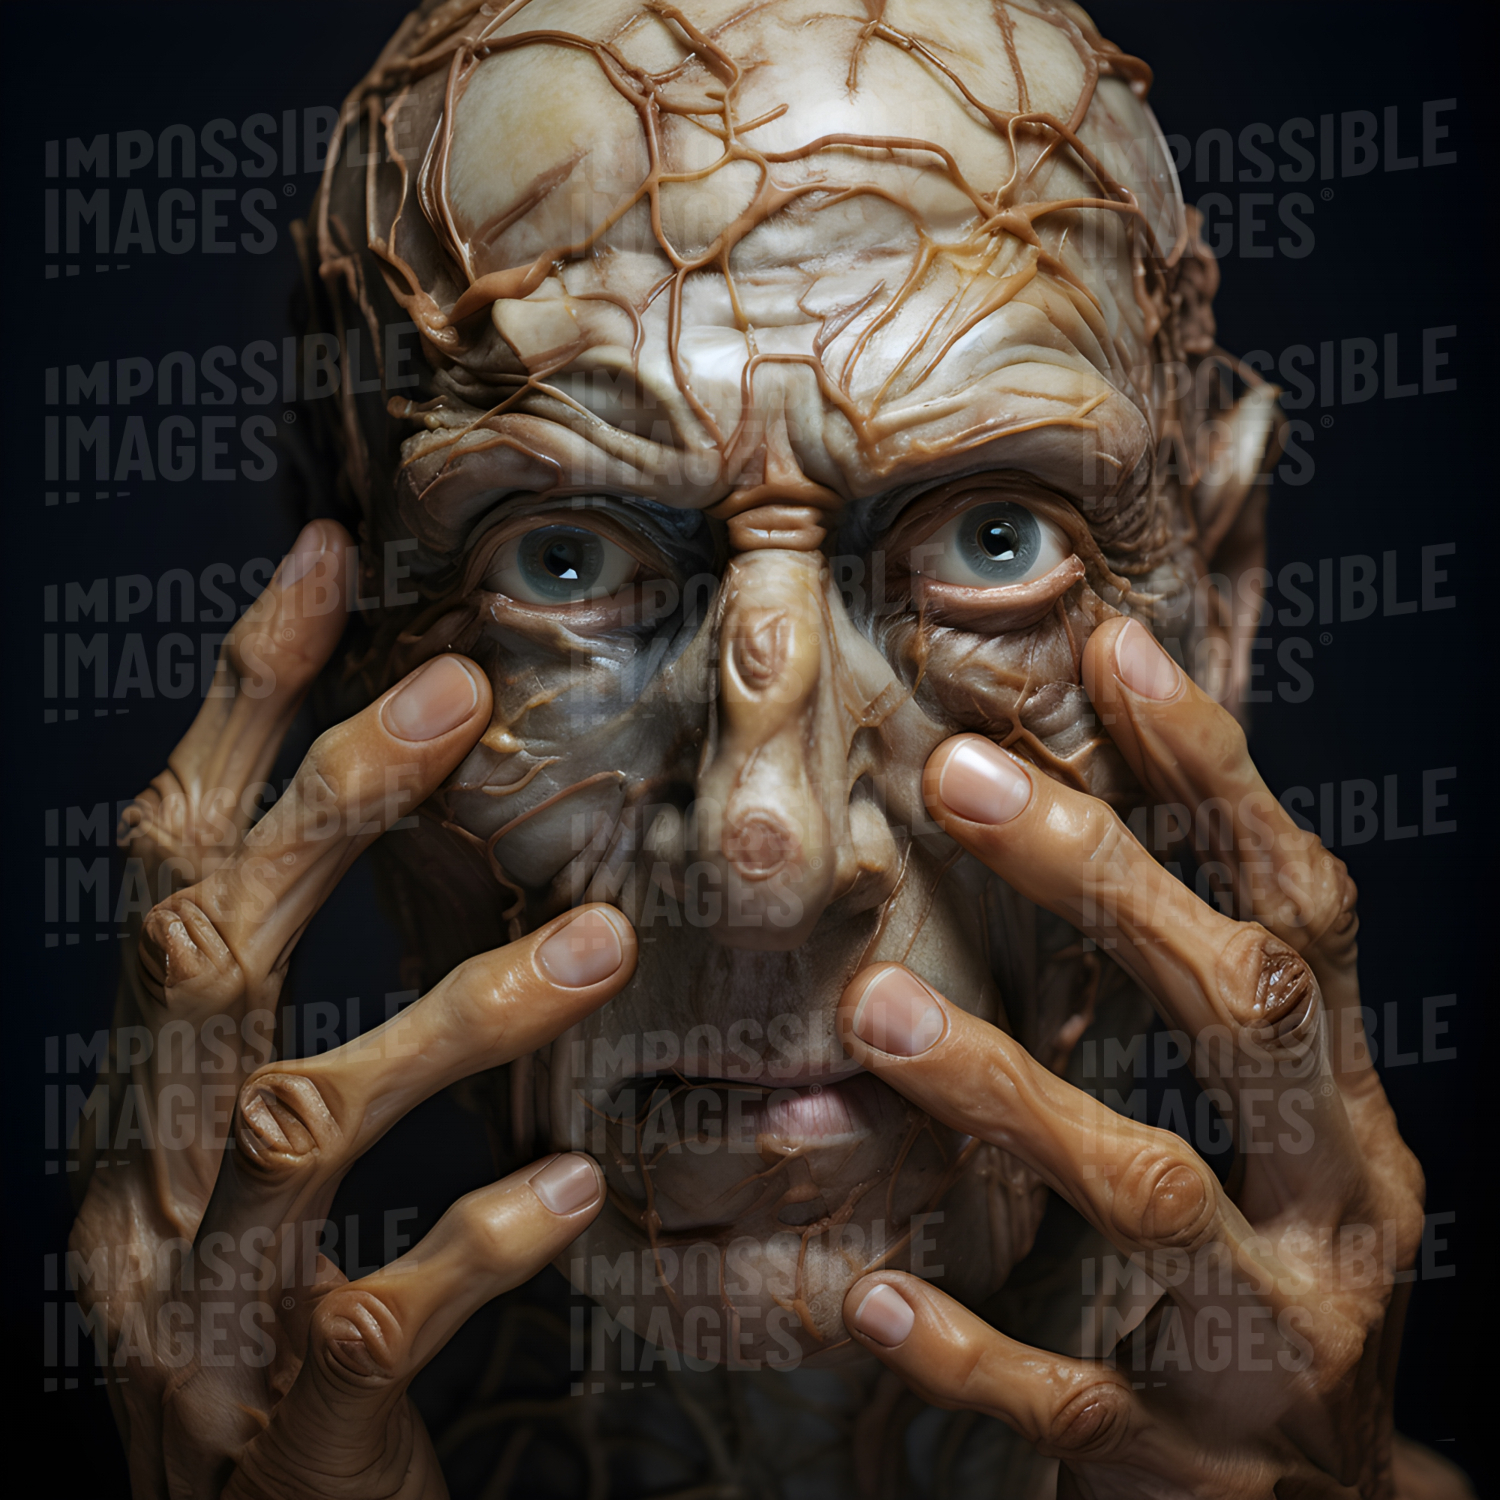 Freaky human face with weird veiny skin held between his hands -  A Human Face With Weird Veiny Skin Held Between Two Hands, An Unsettling Sight To Behold.